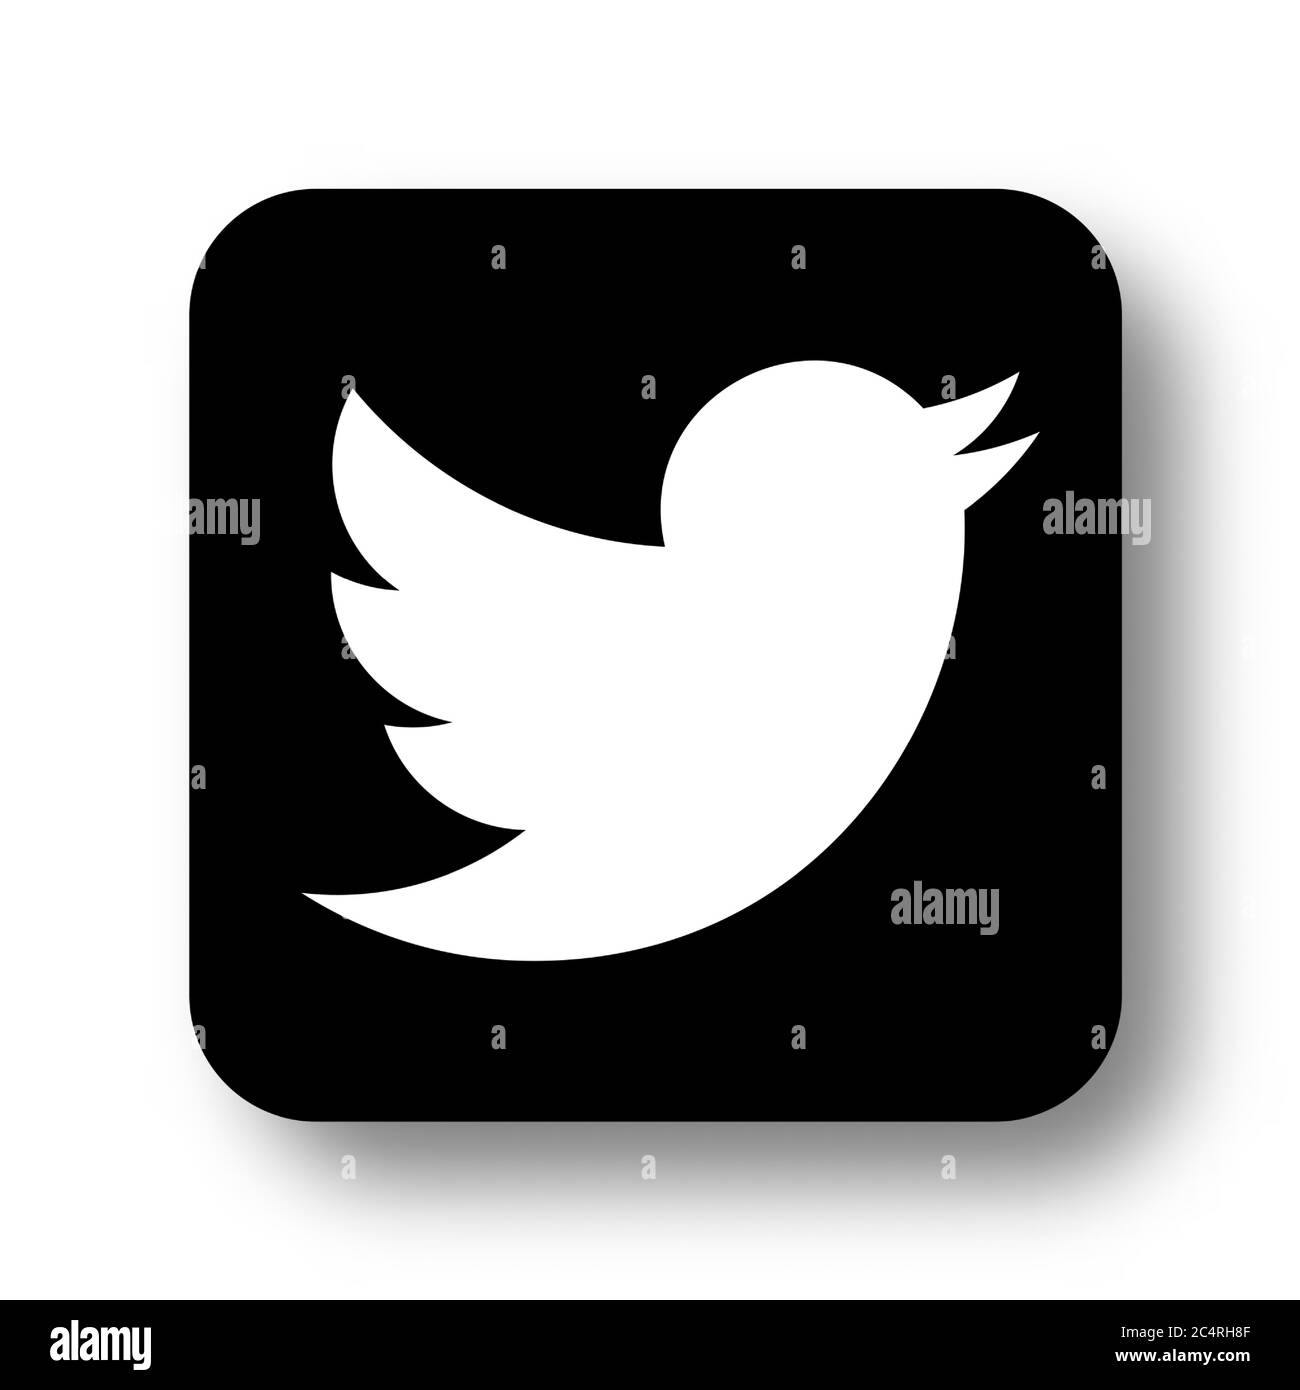 VORONEZH, RUSSIA - JANUARY 31, 2020: Twitter logo black square icon with soft shadow Stock Vector